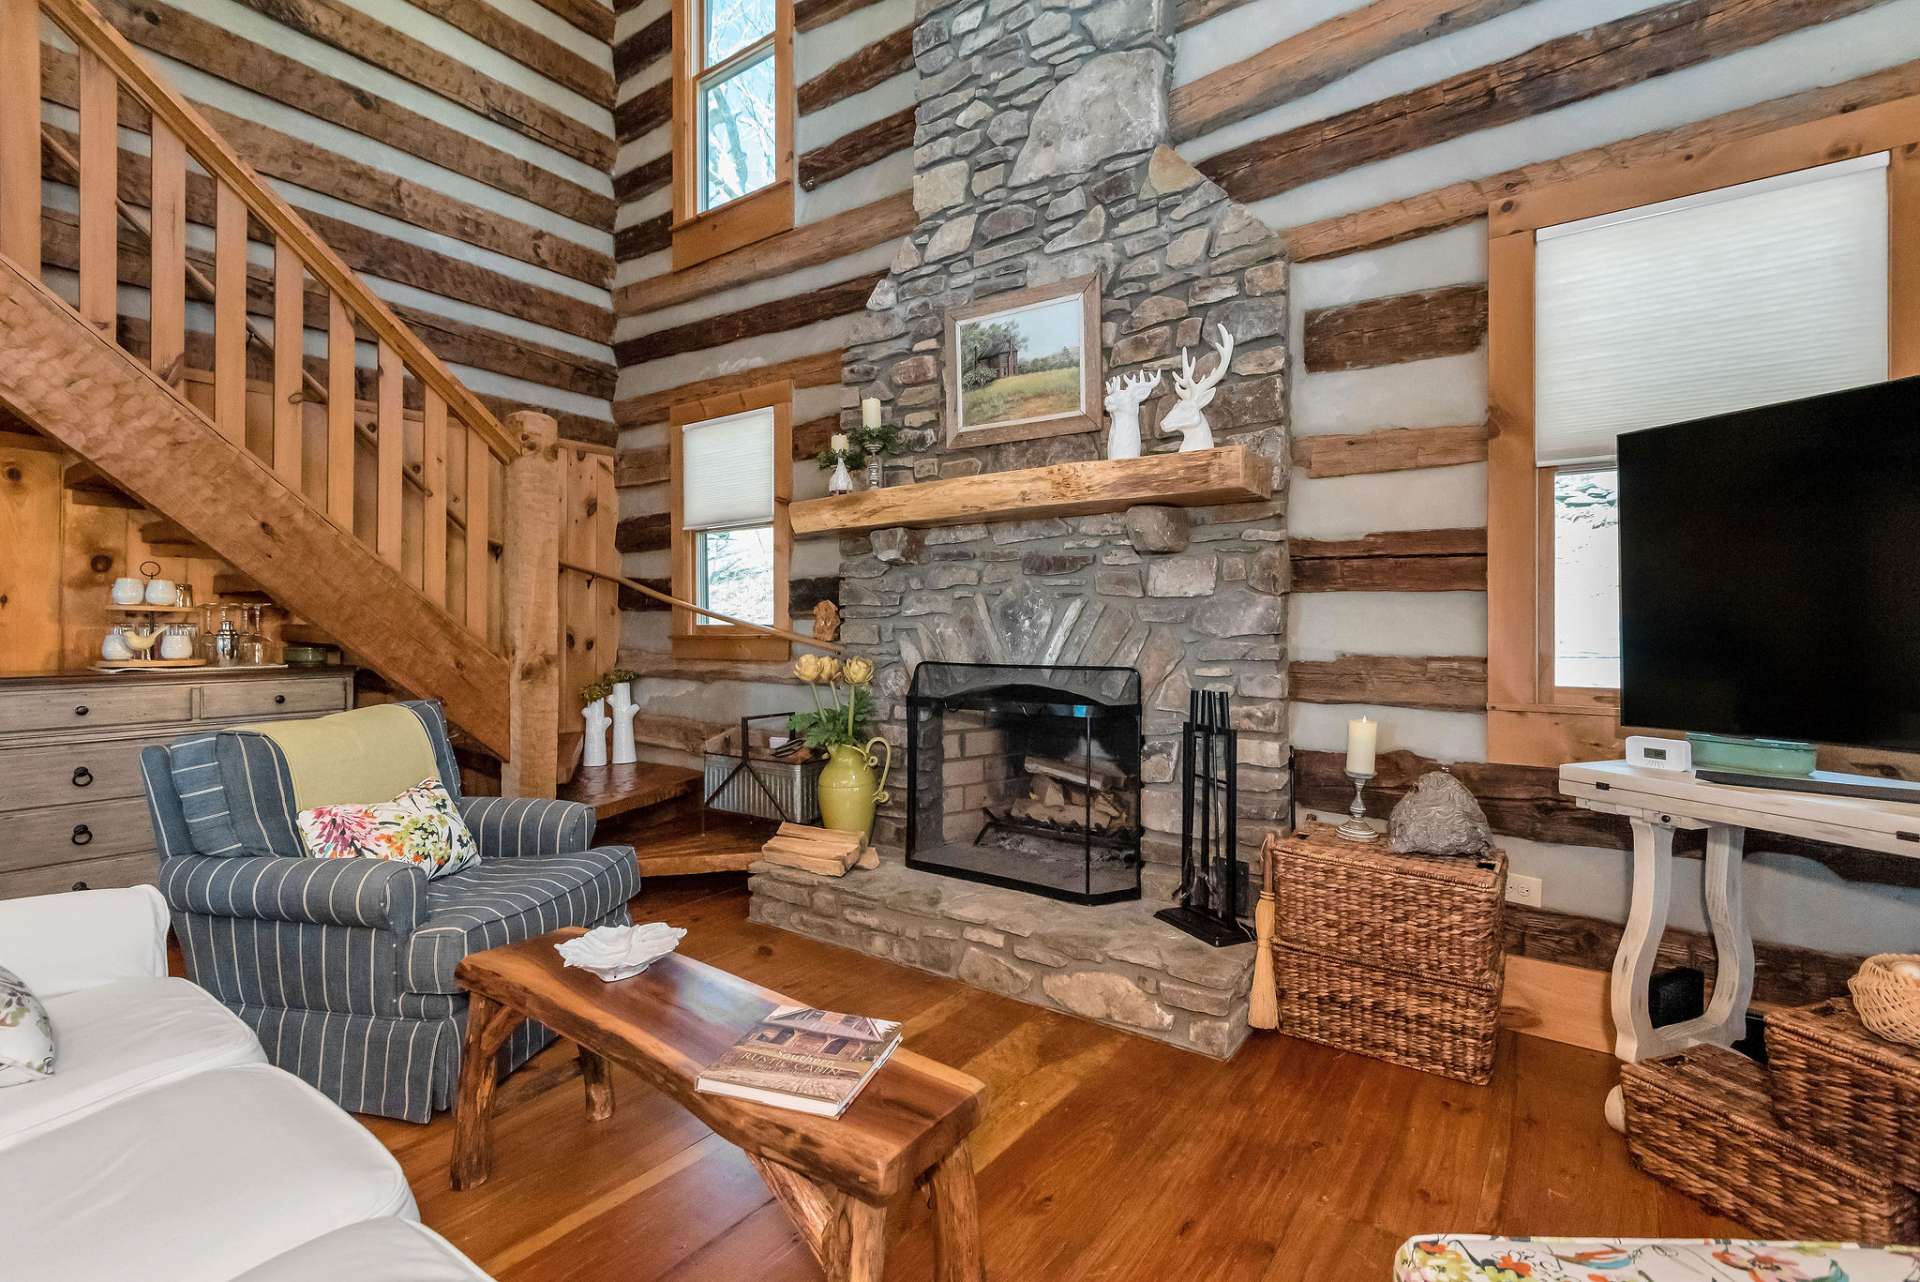 Enjoy the warmth and ambiance of this two-story native stone wood-burning fireplace